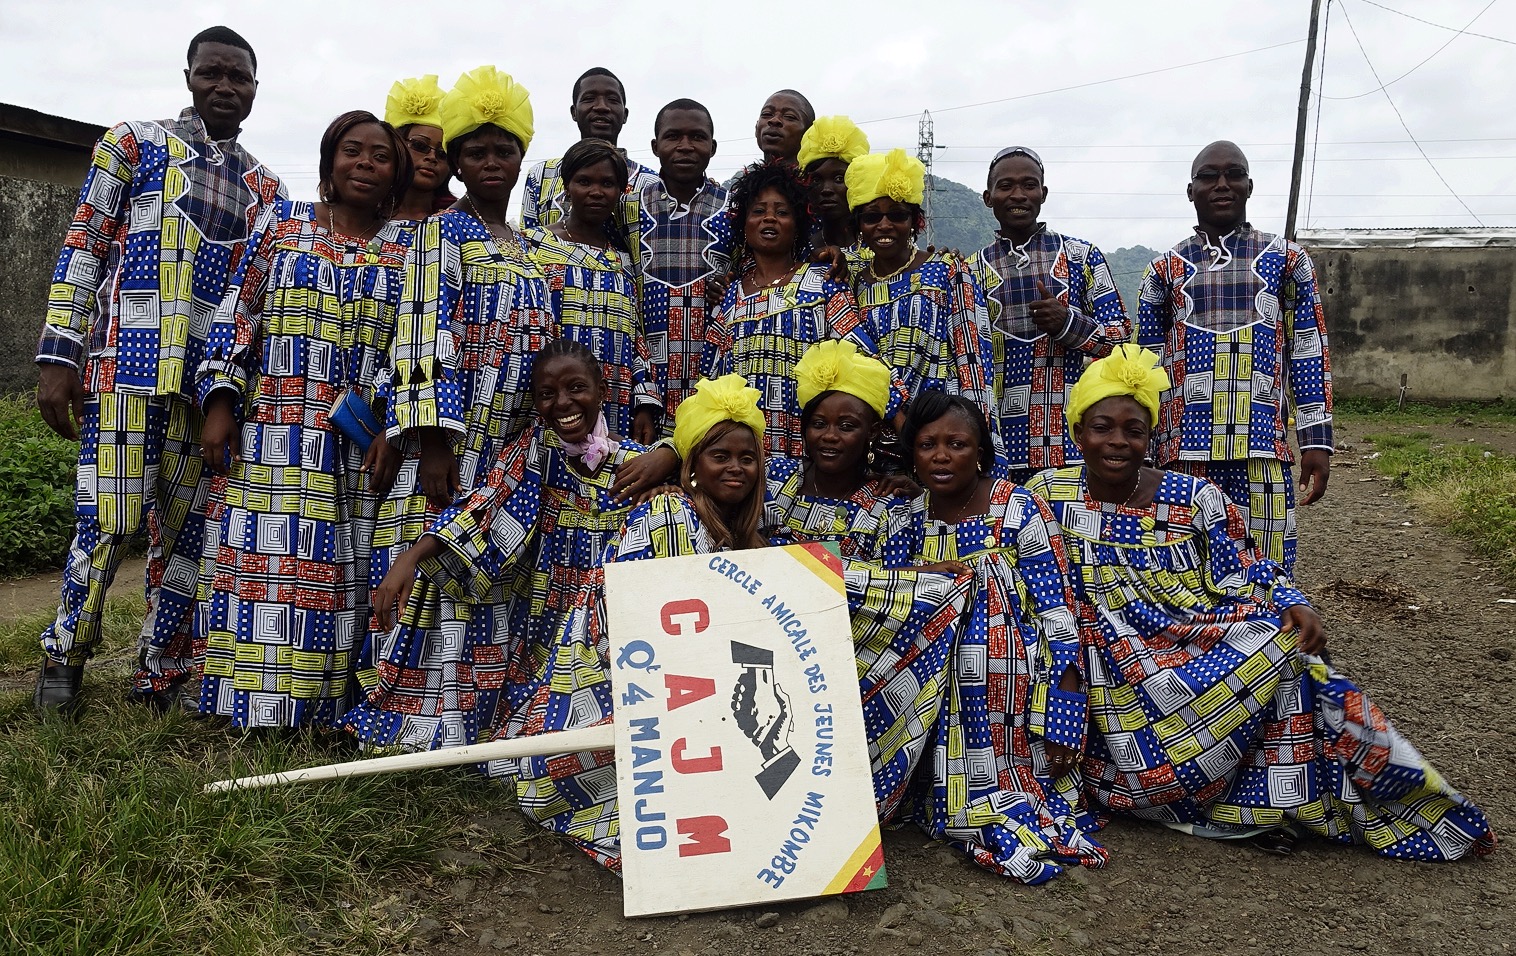 A group of people all wearing clothes made from the same cloth pose with a sign for their group